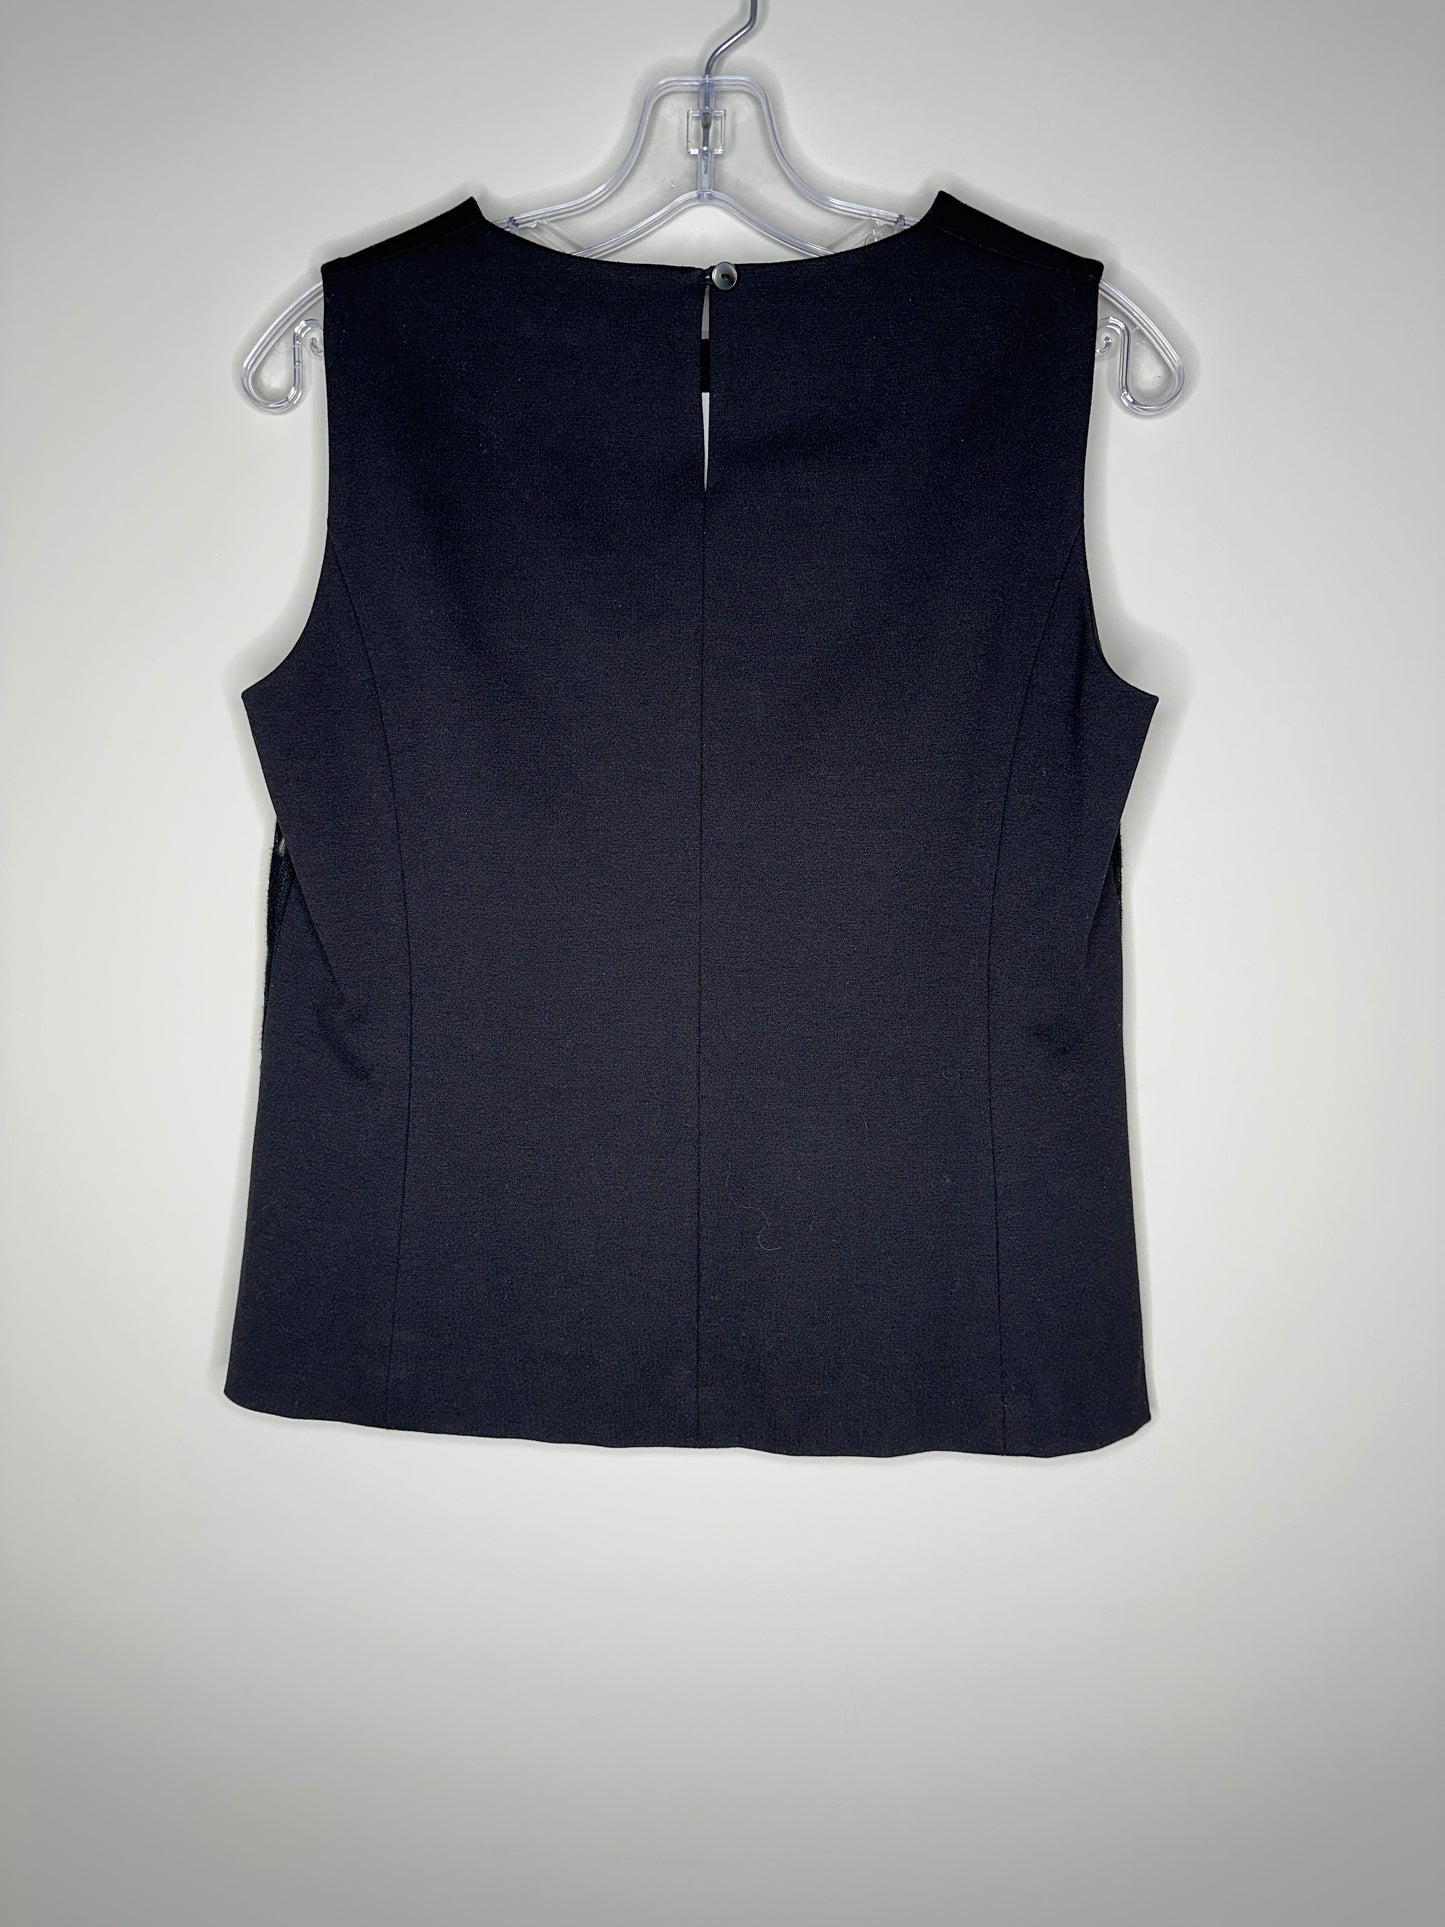 Classiques Entier Size M Black Sleeveless Top with Holes Mesh Front